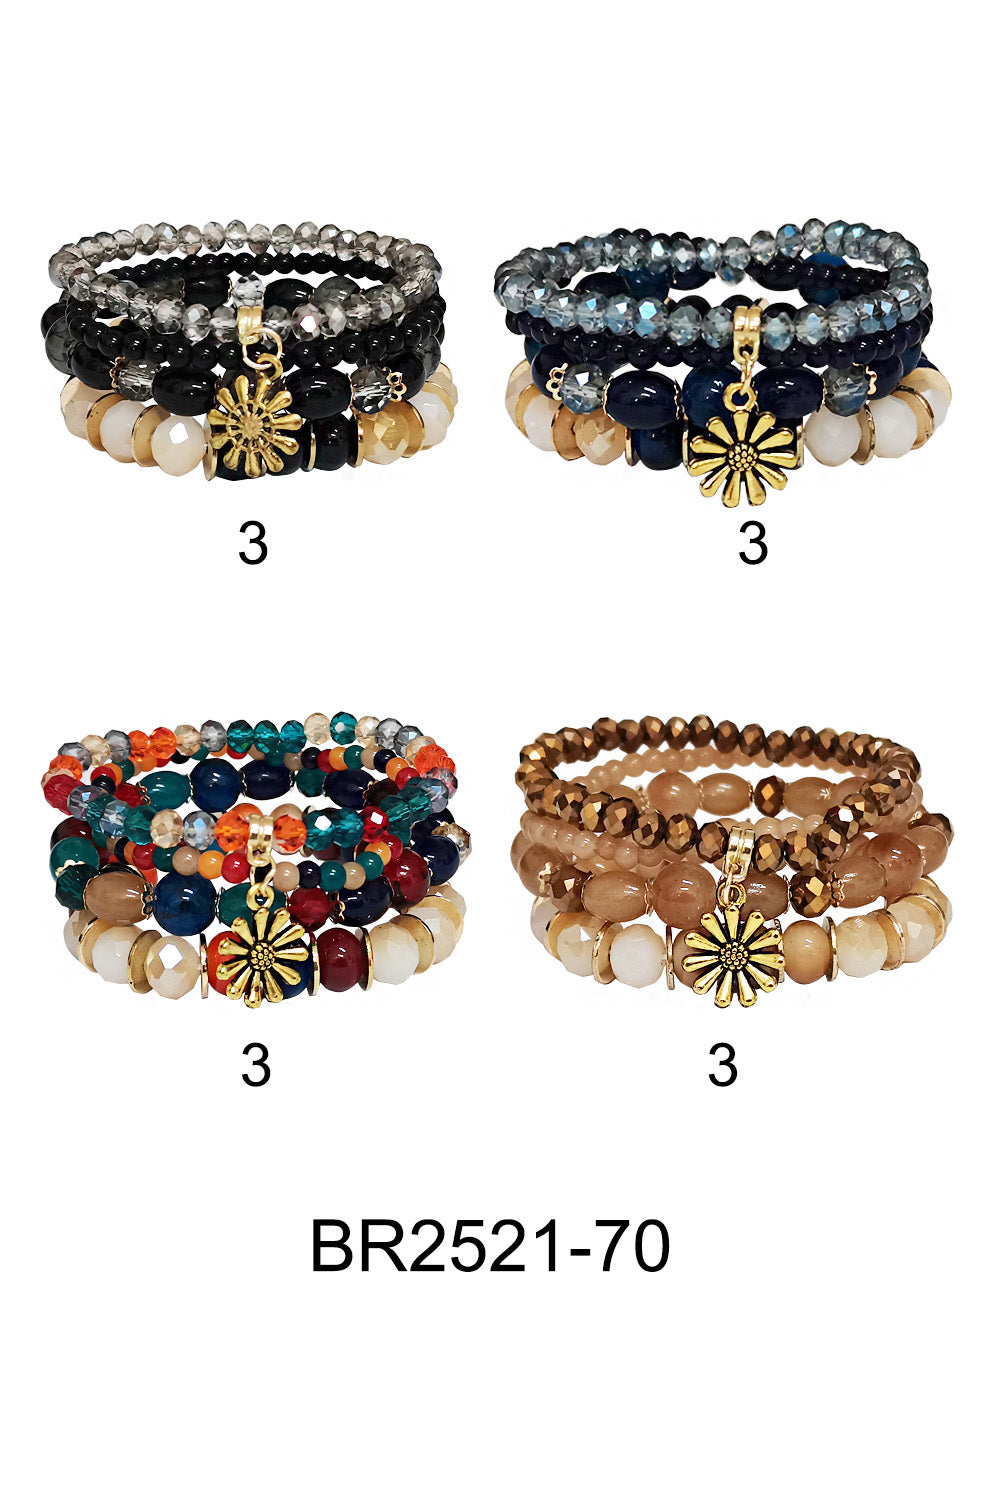 BR2521-70 (12PC)